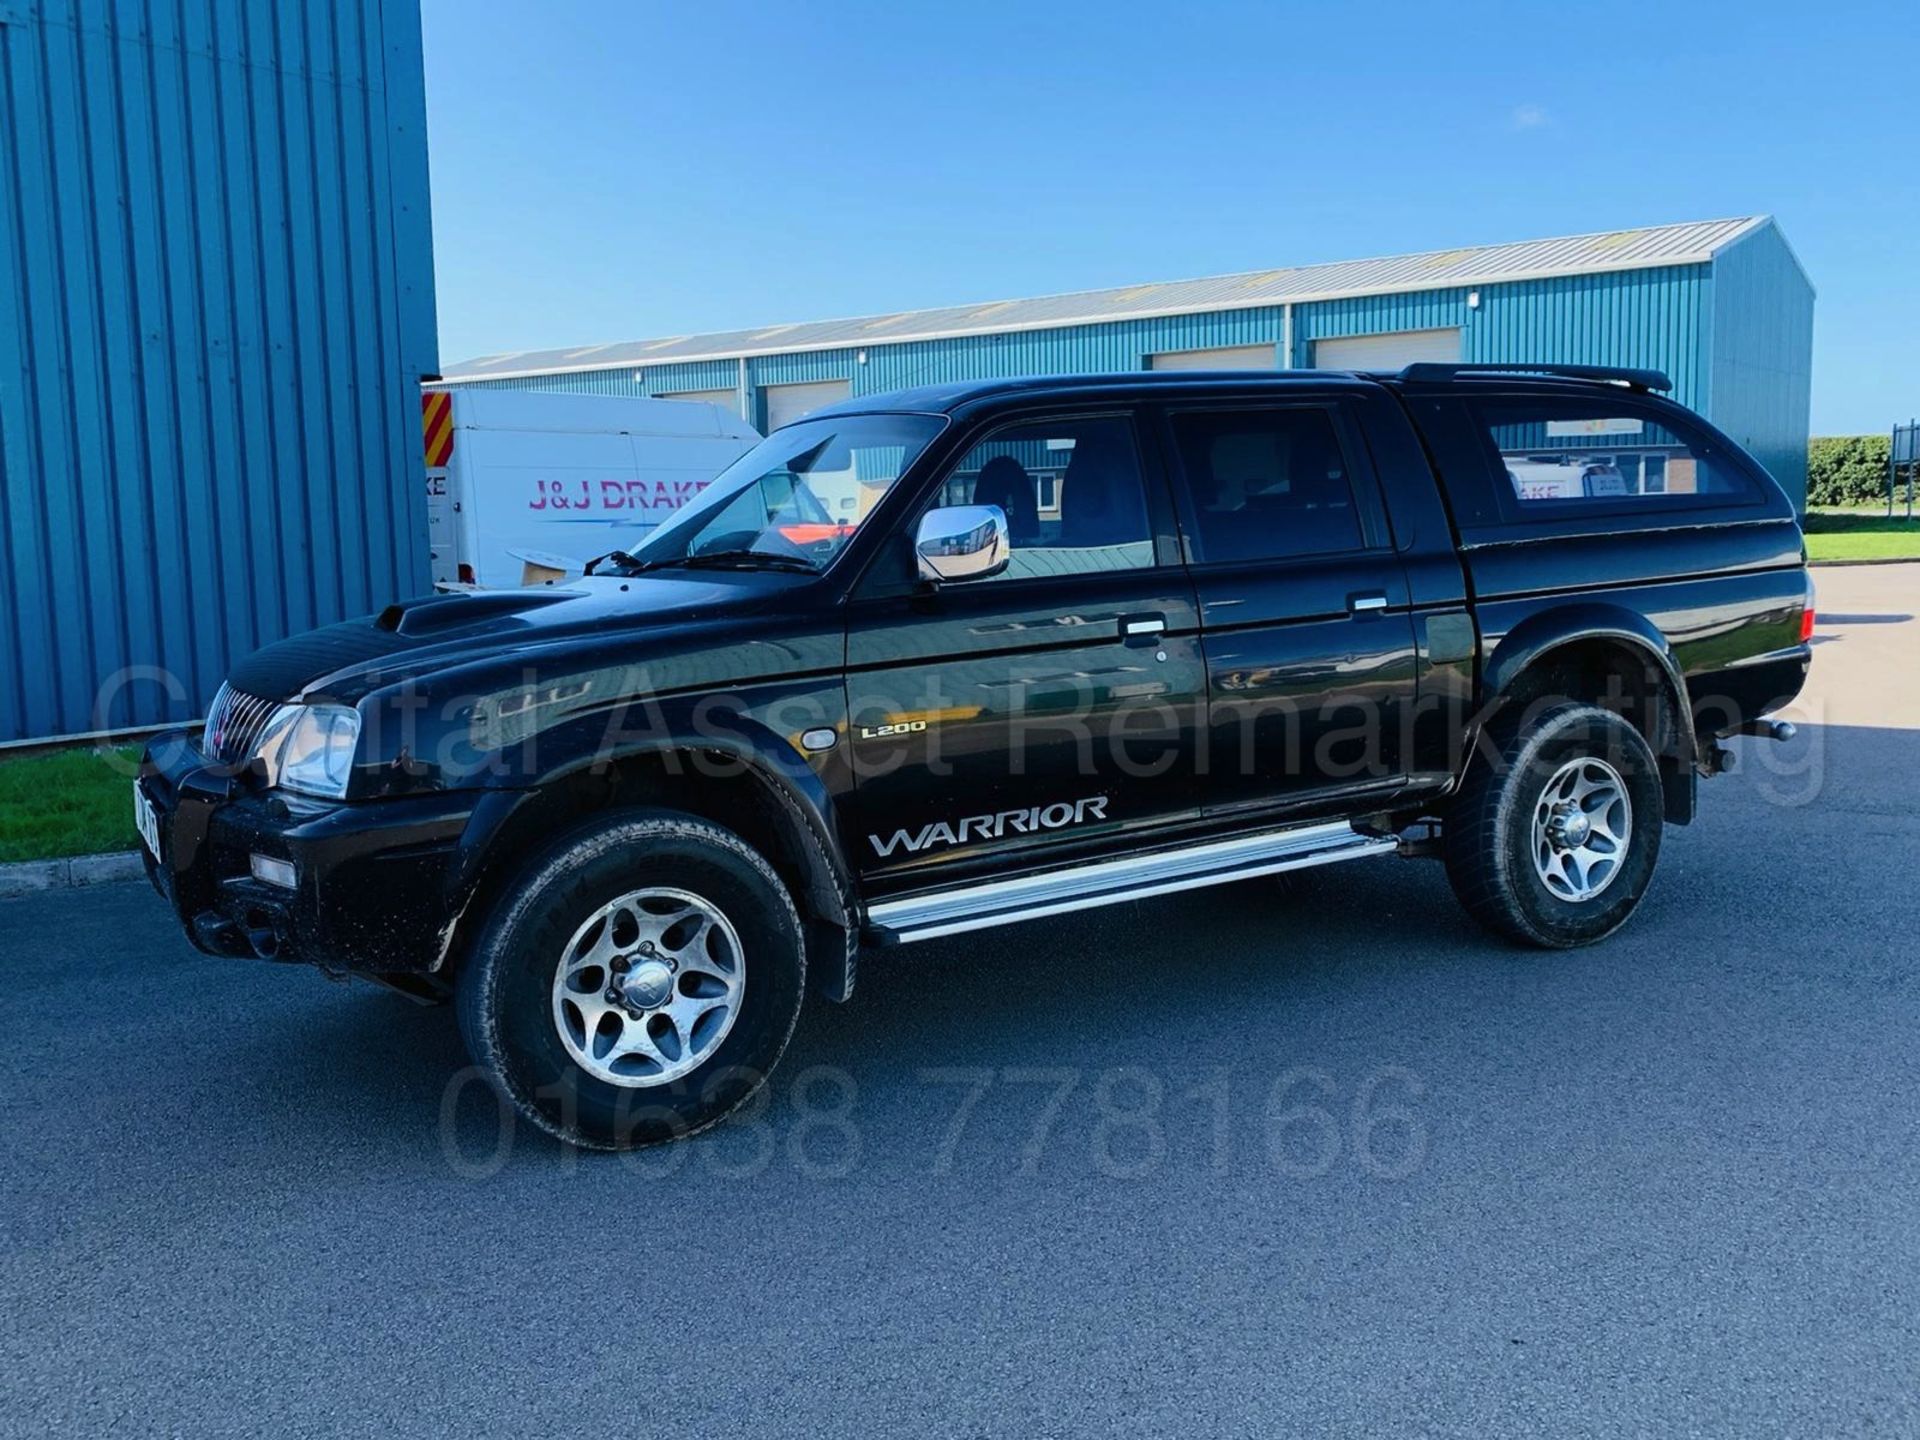 (ON SALE) MITSUBISHI L200 *WARRIOR* D/CAB PICK-UP (2004) '2.5 DIESEL' *AIR CON - LEATHER* (NO VAT) - Image 2 of 26